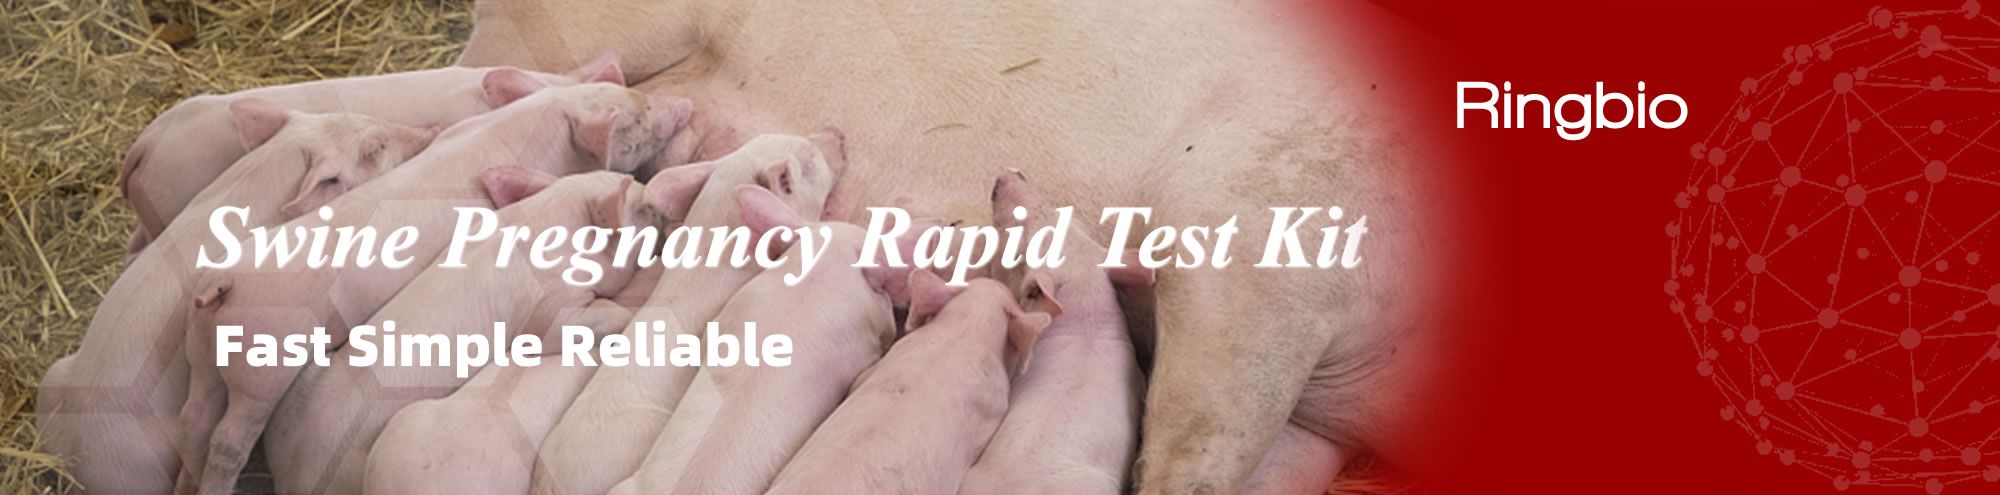 Ringbio Pig Pregnancy Rapid Test Kit has been upgraded